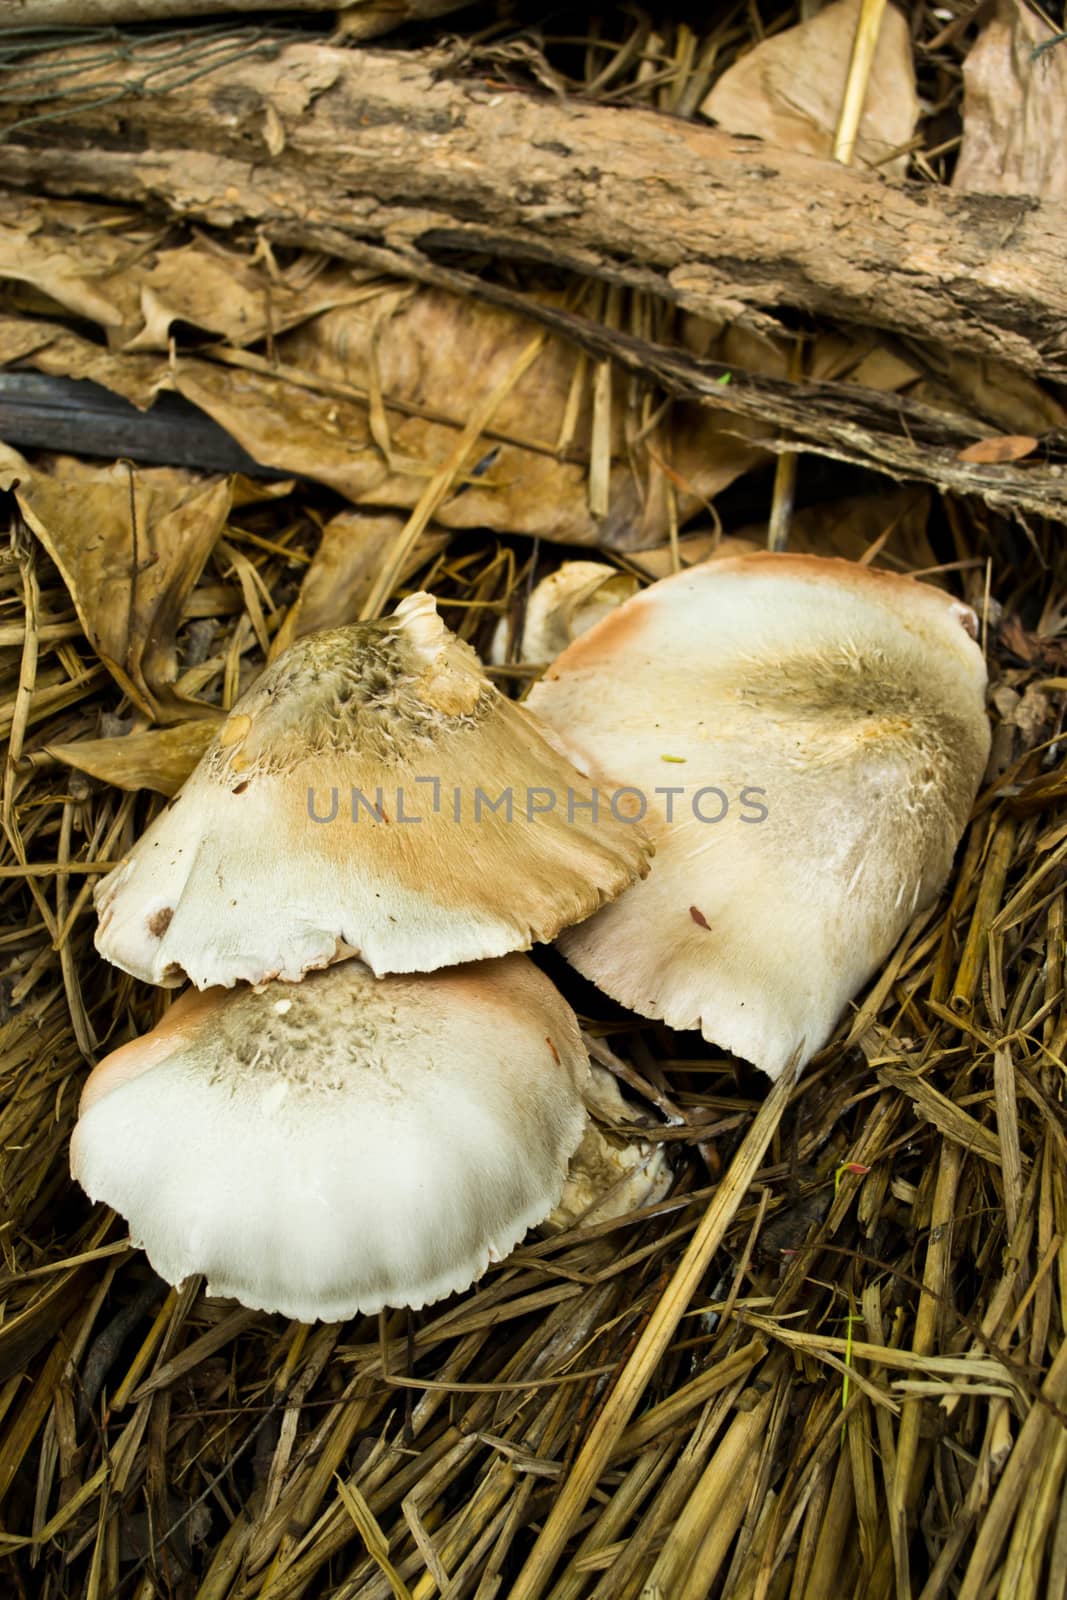 Mushrooms out on a pile of straw